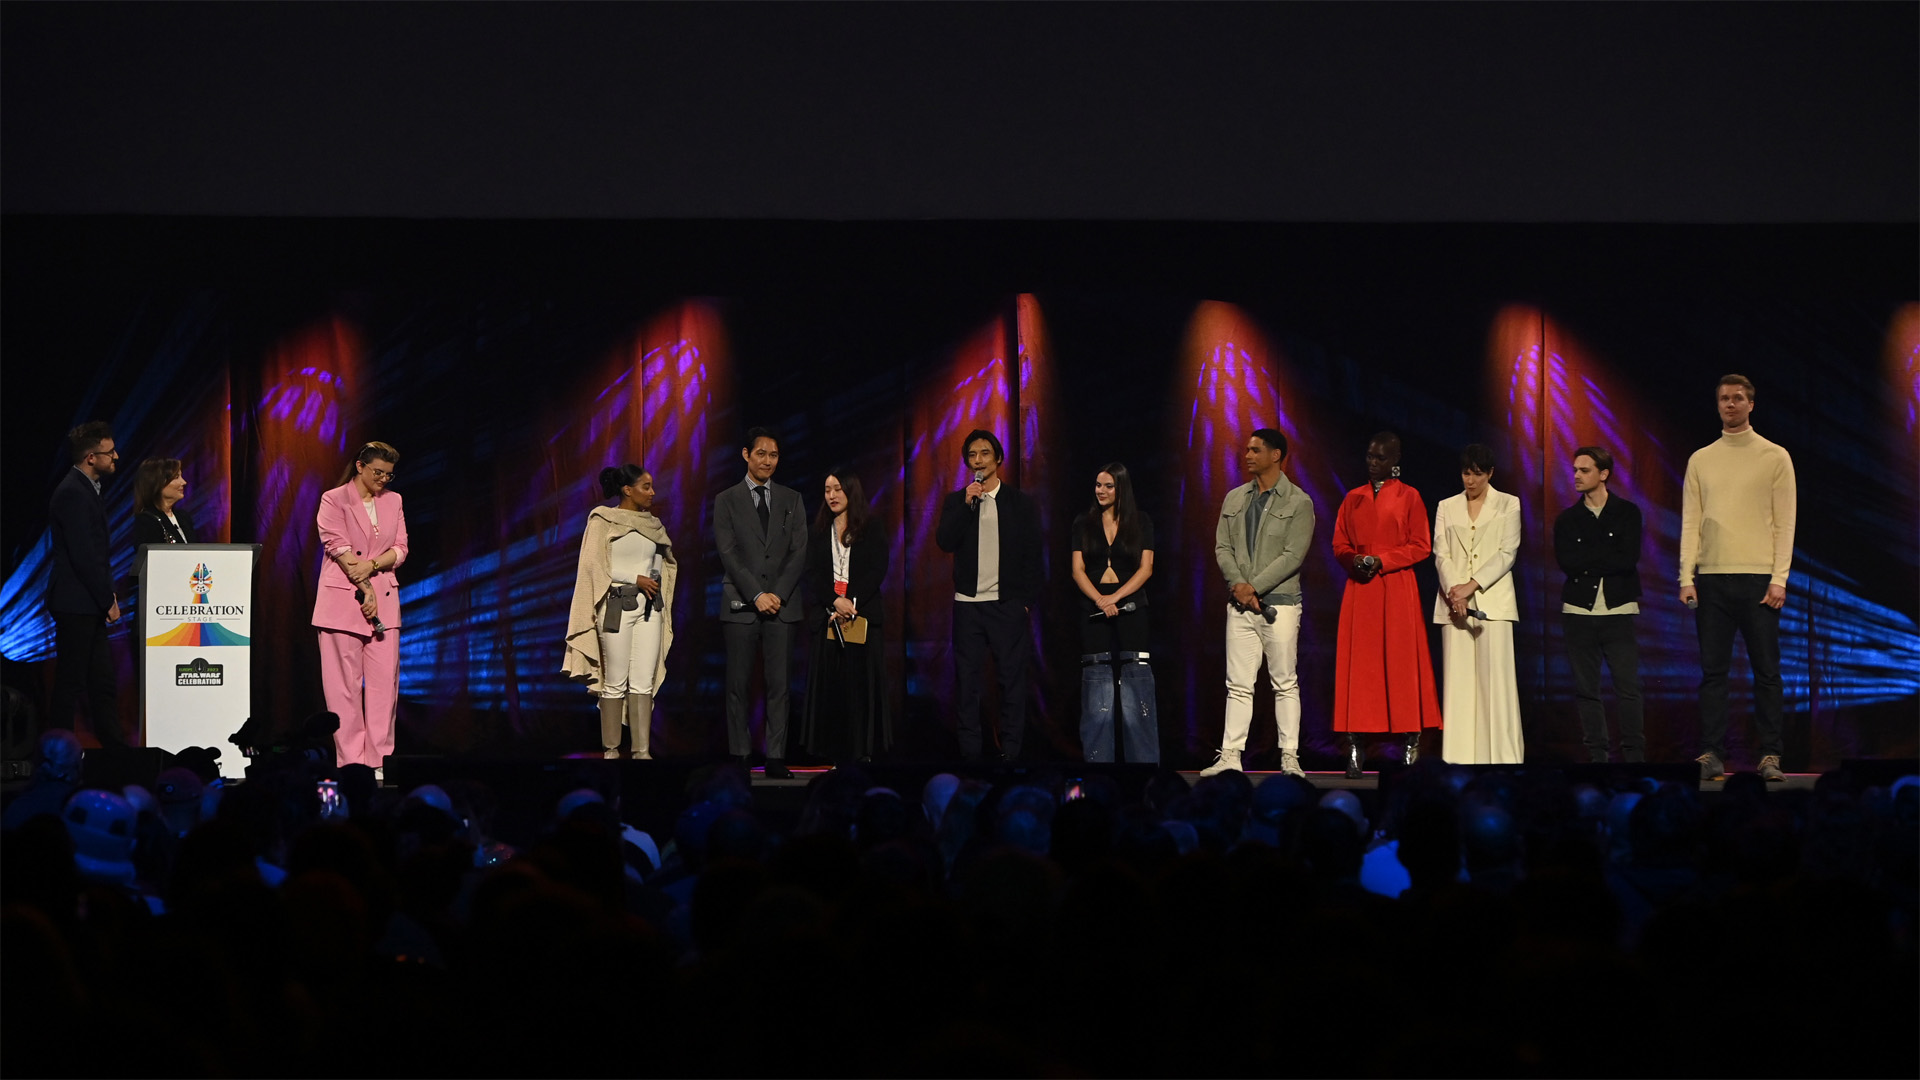 The cast of The Acolyte on stage at Star Wars Celebration 2023